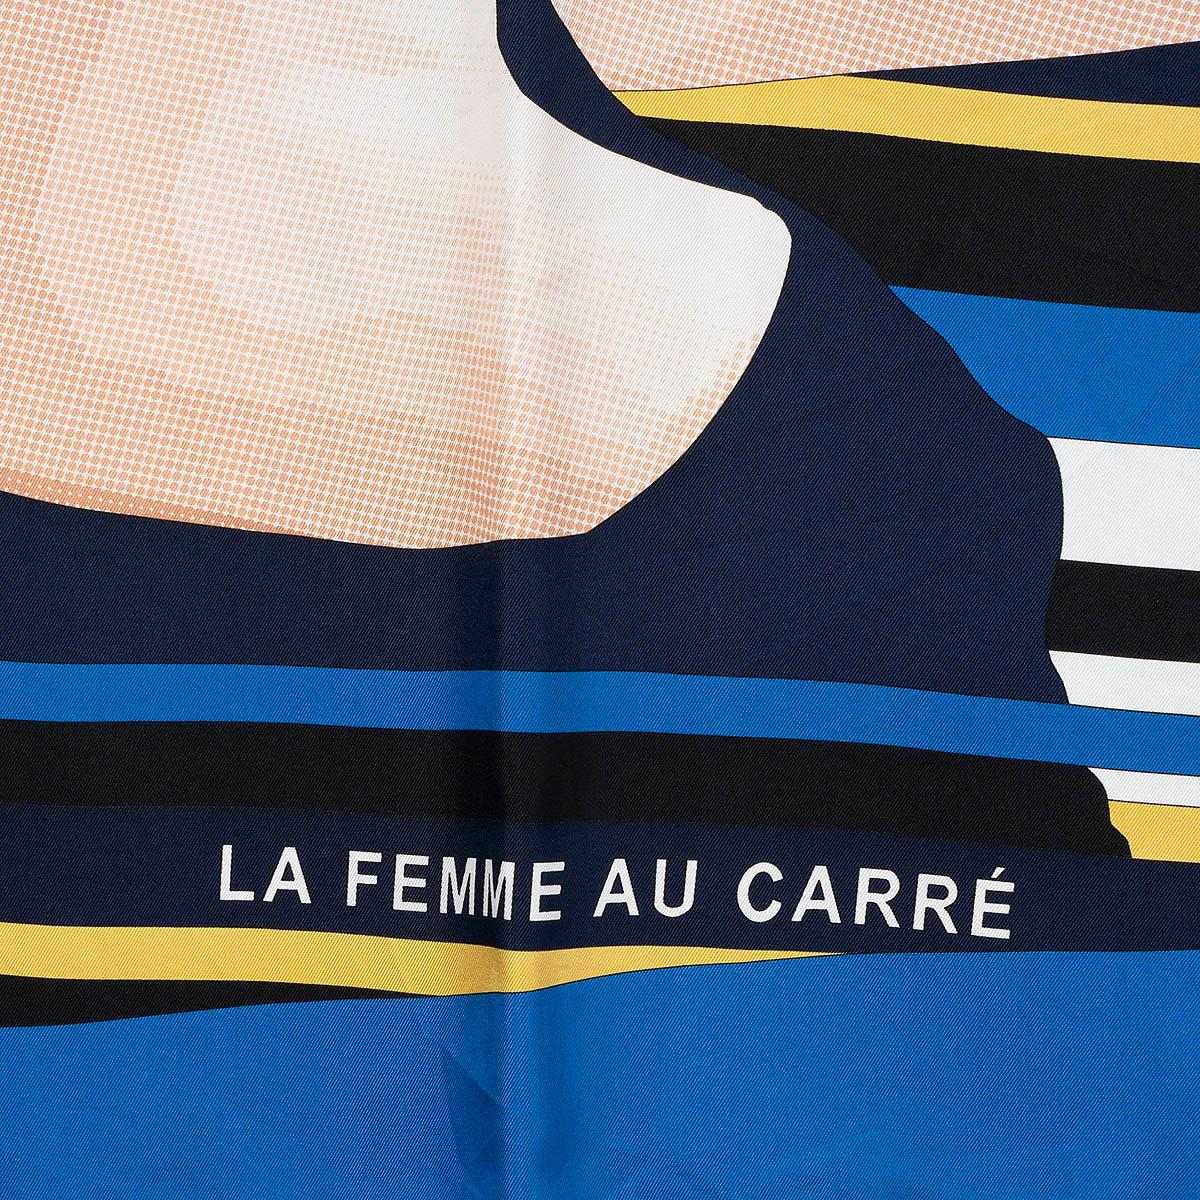 100% authentic Hermès 90 scarf La Femme Au Carré in blue and navy silk (100%) with details in black, grey, white, nude, ochre and magenta. Has been worn and is in excellent condition. 

Measurements
Width	90cm (35.1in)
Length	90cm (35.1in)

All our